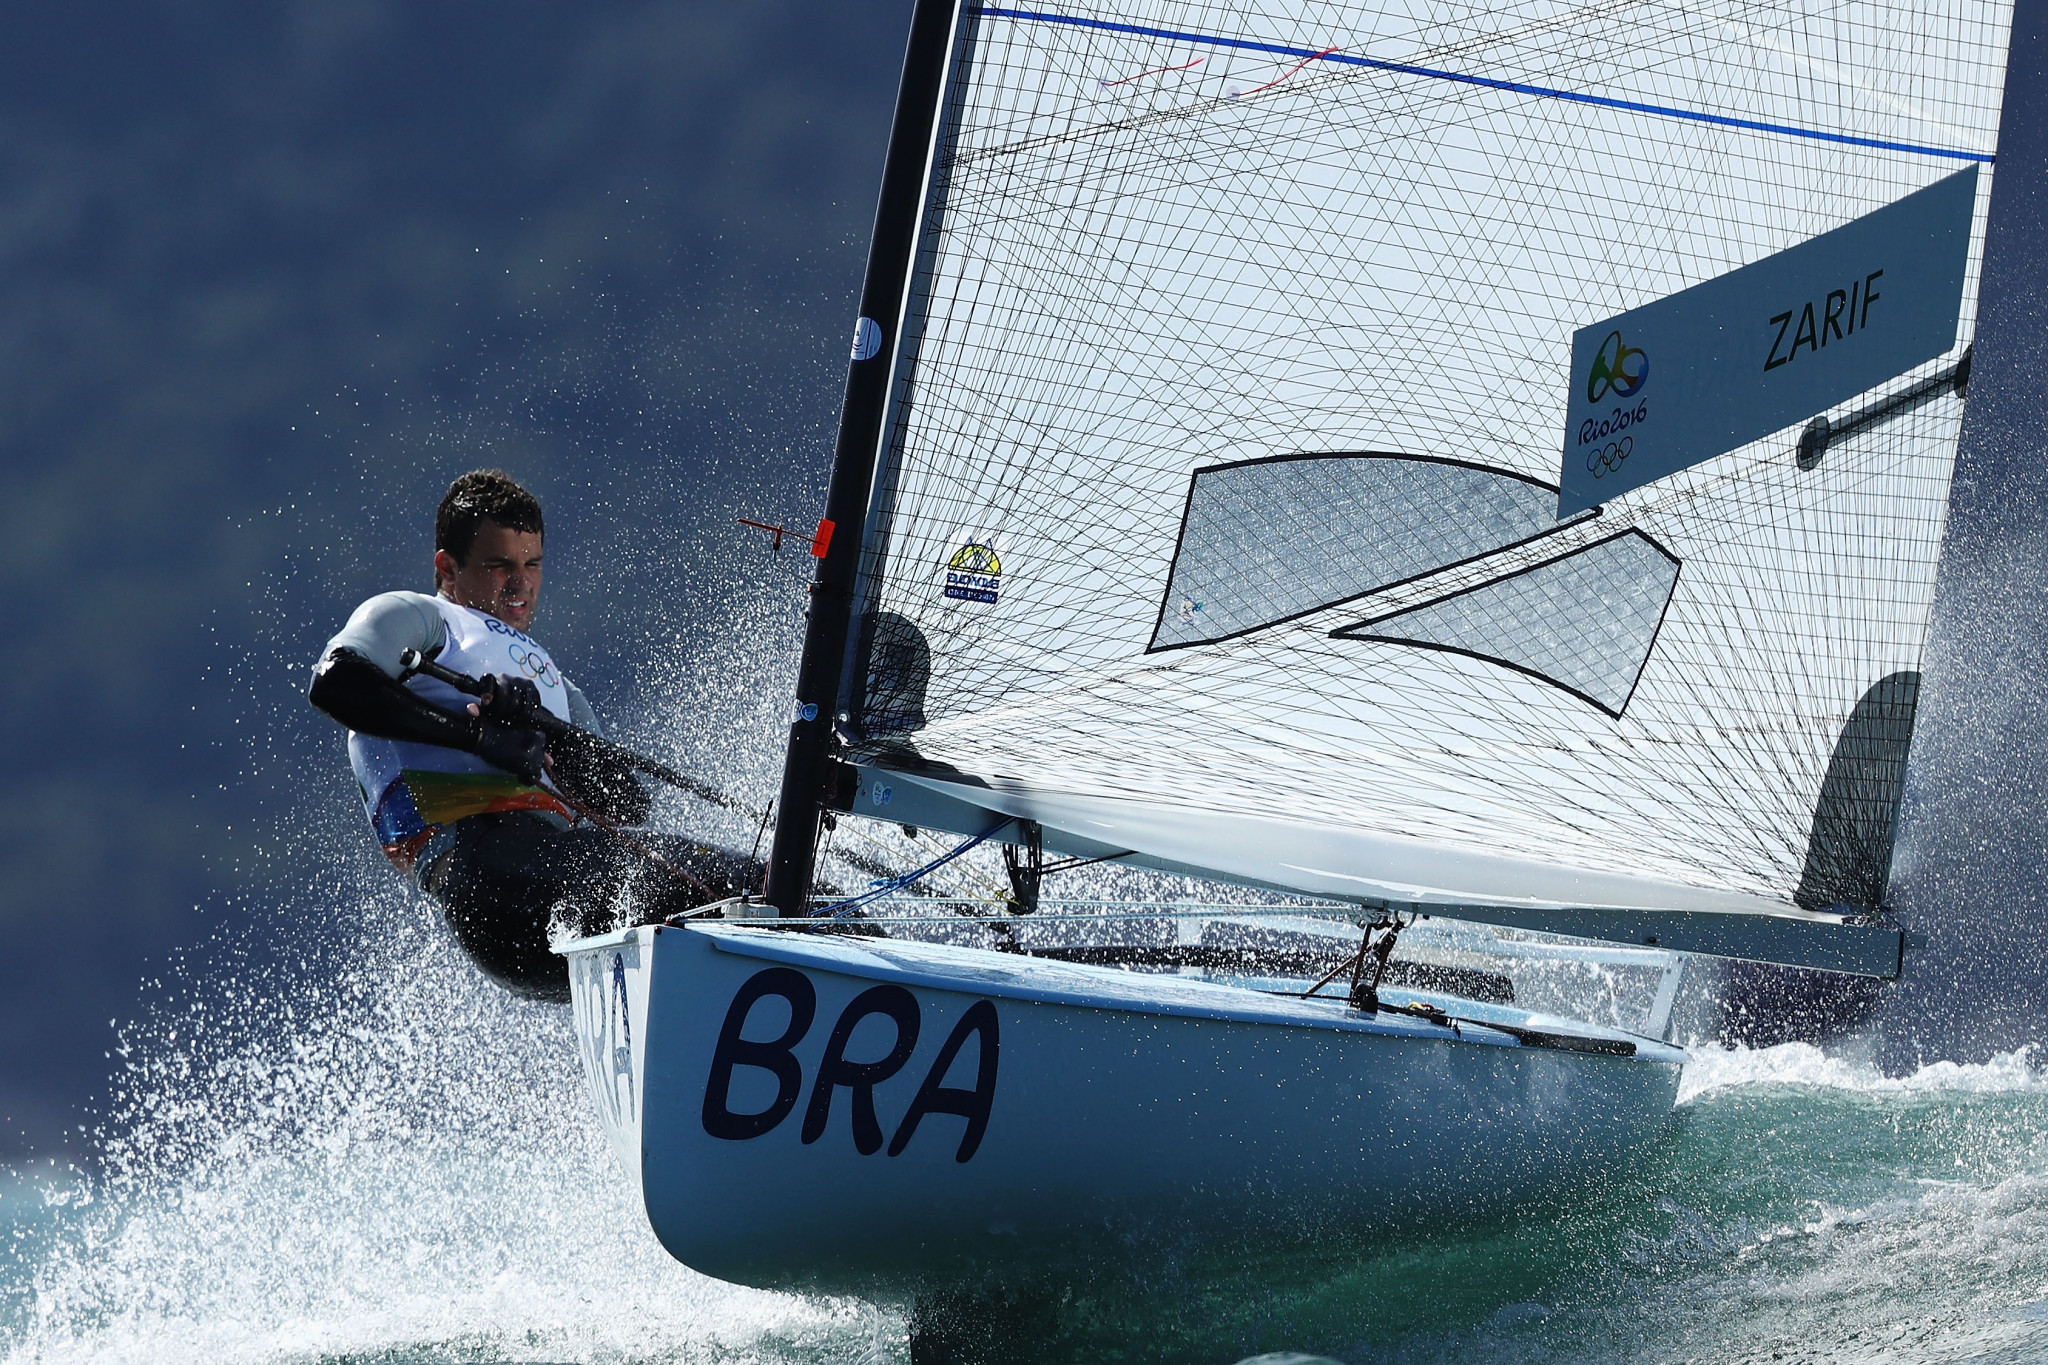 Brazil's Jorge Zarif won the Finn Class gold at the Sailing World Cup Final in Marseille ©Getty Images  